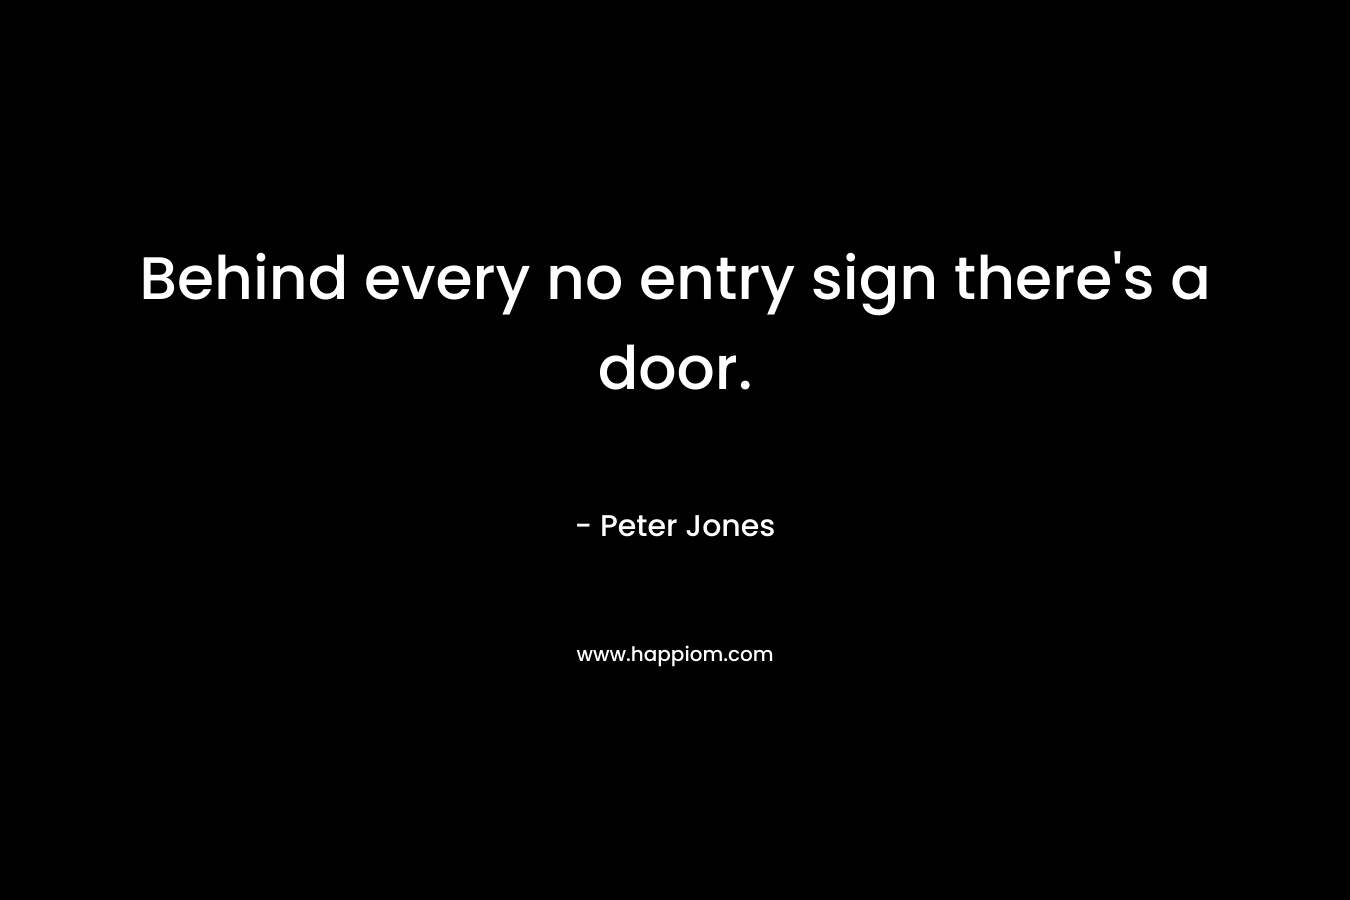 Behind every no entry sign there’s a door. – Peter Jones